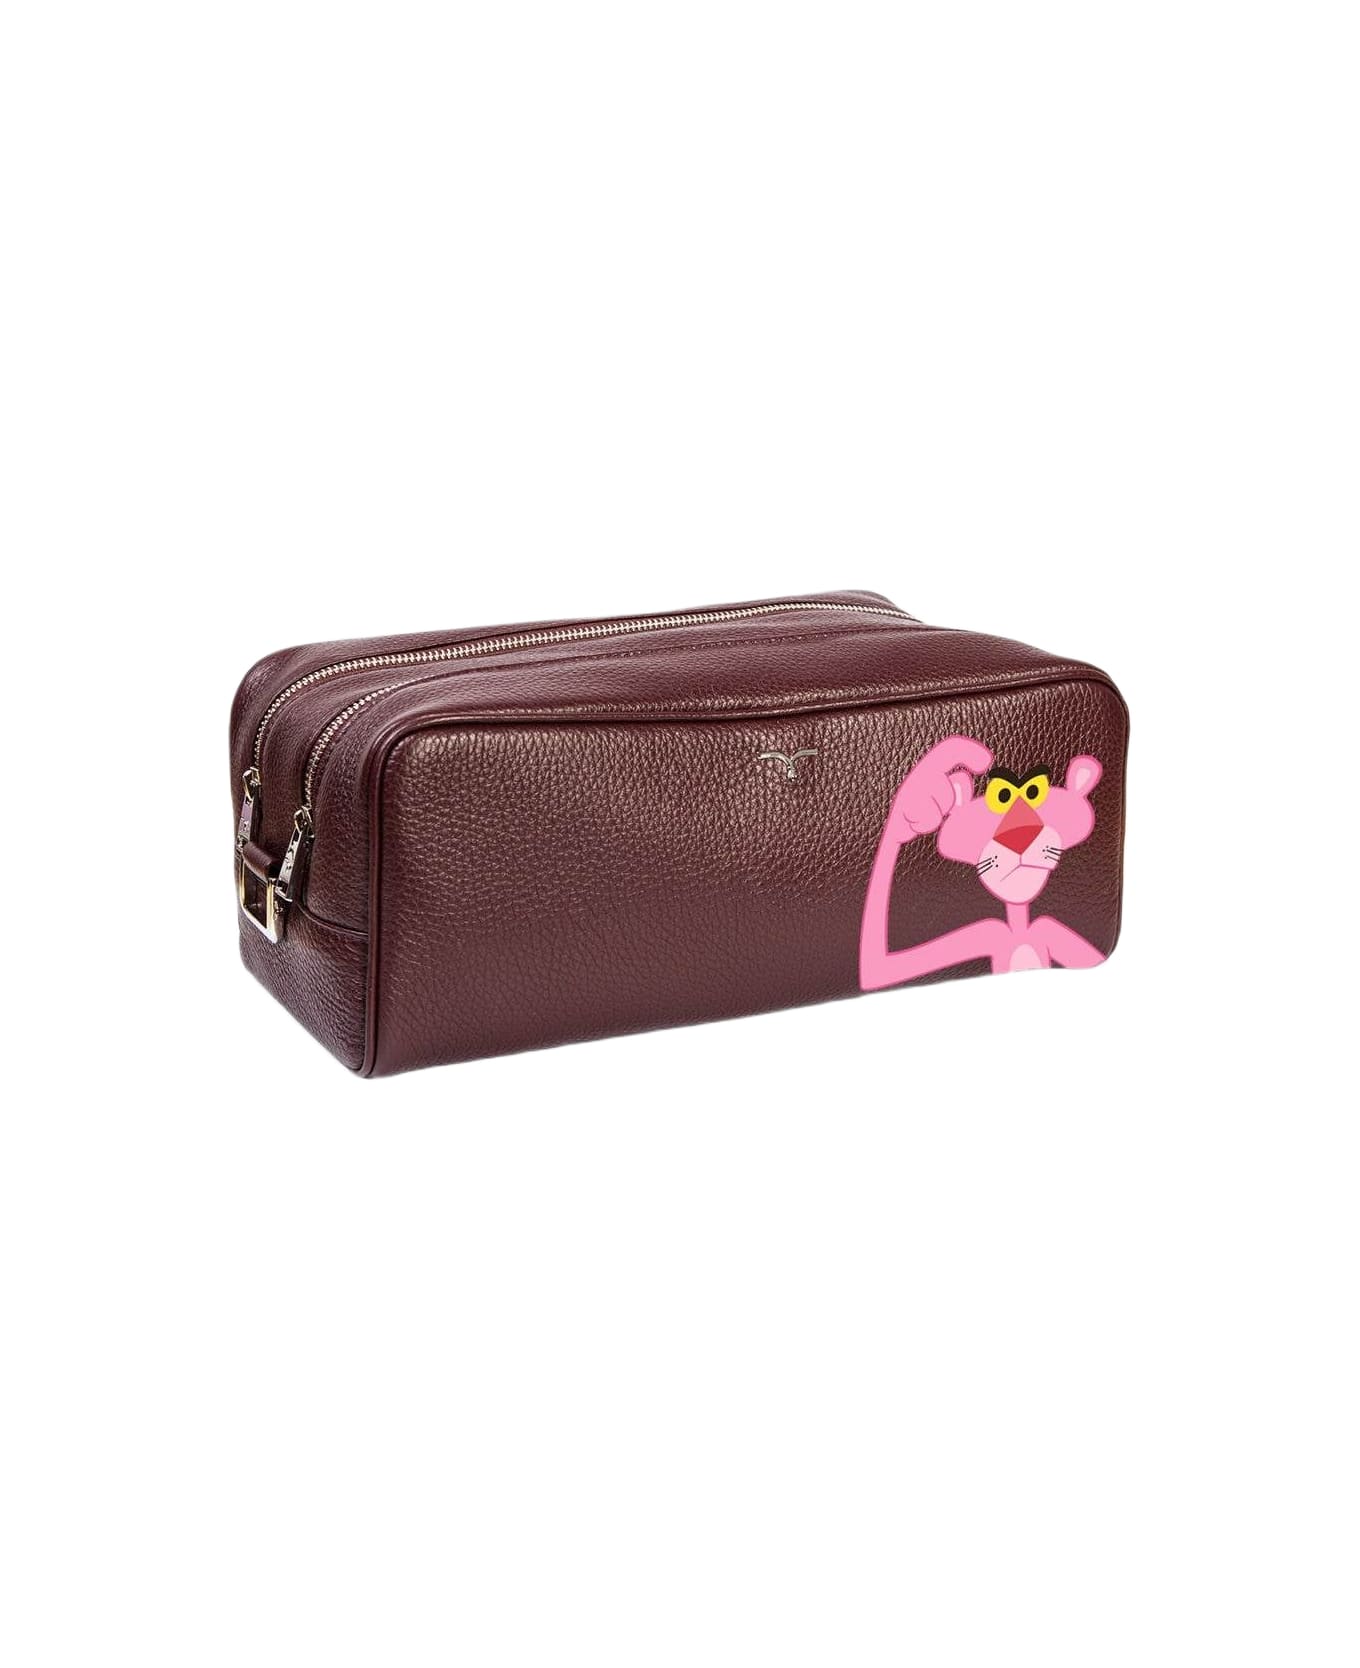 Larusmiani Nécessaire 'pink Panther' Luggage - DarkRed トラベルバッグ